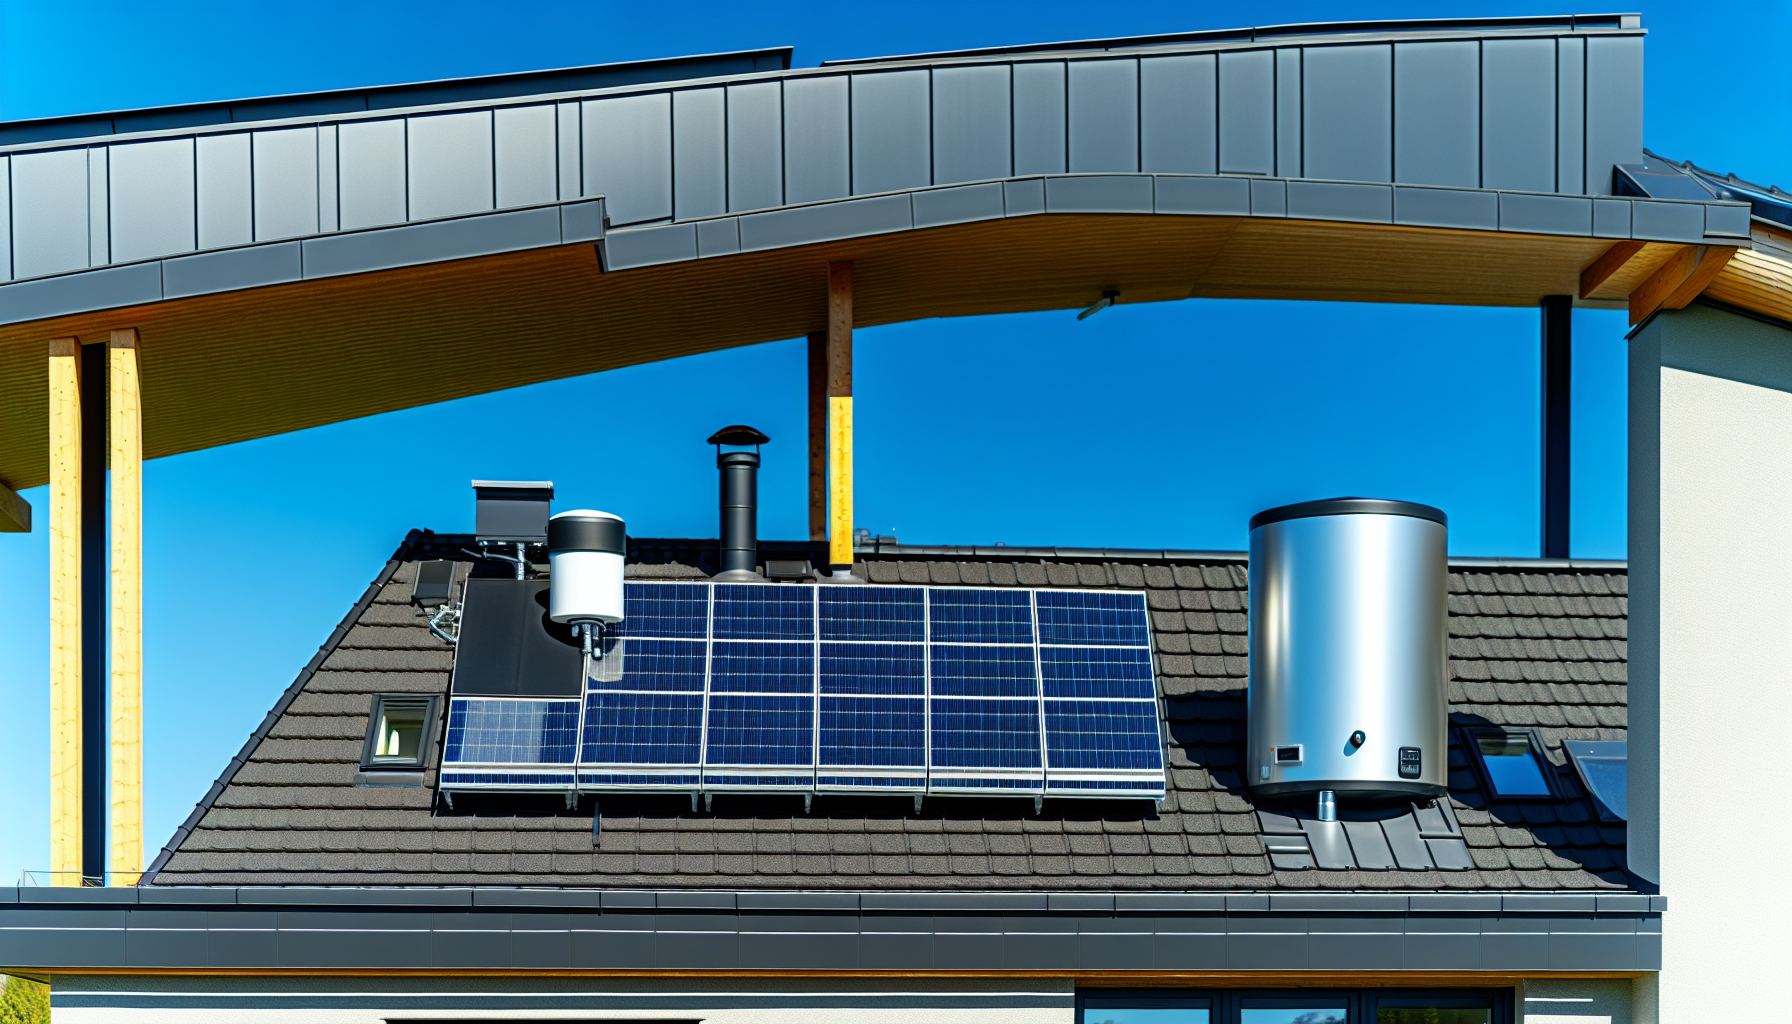 Solar hot water system with rooftop solar panels